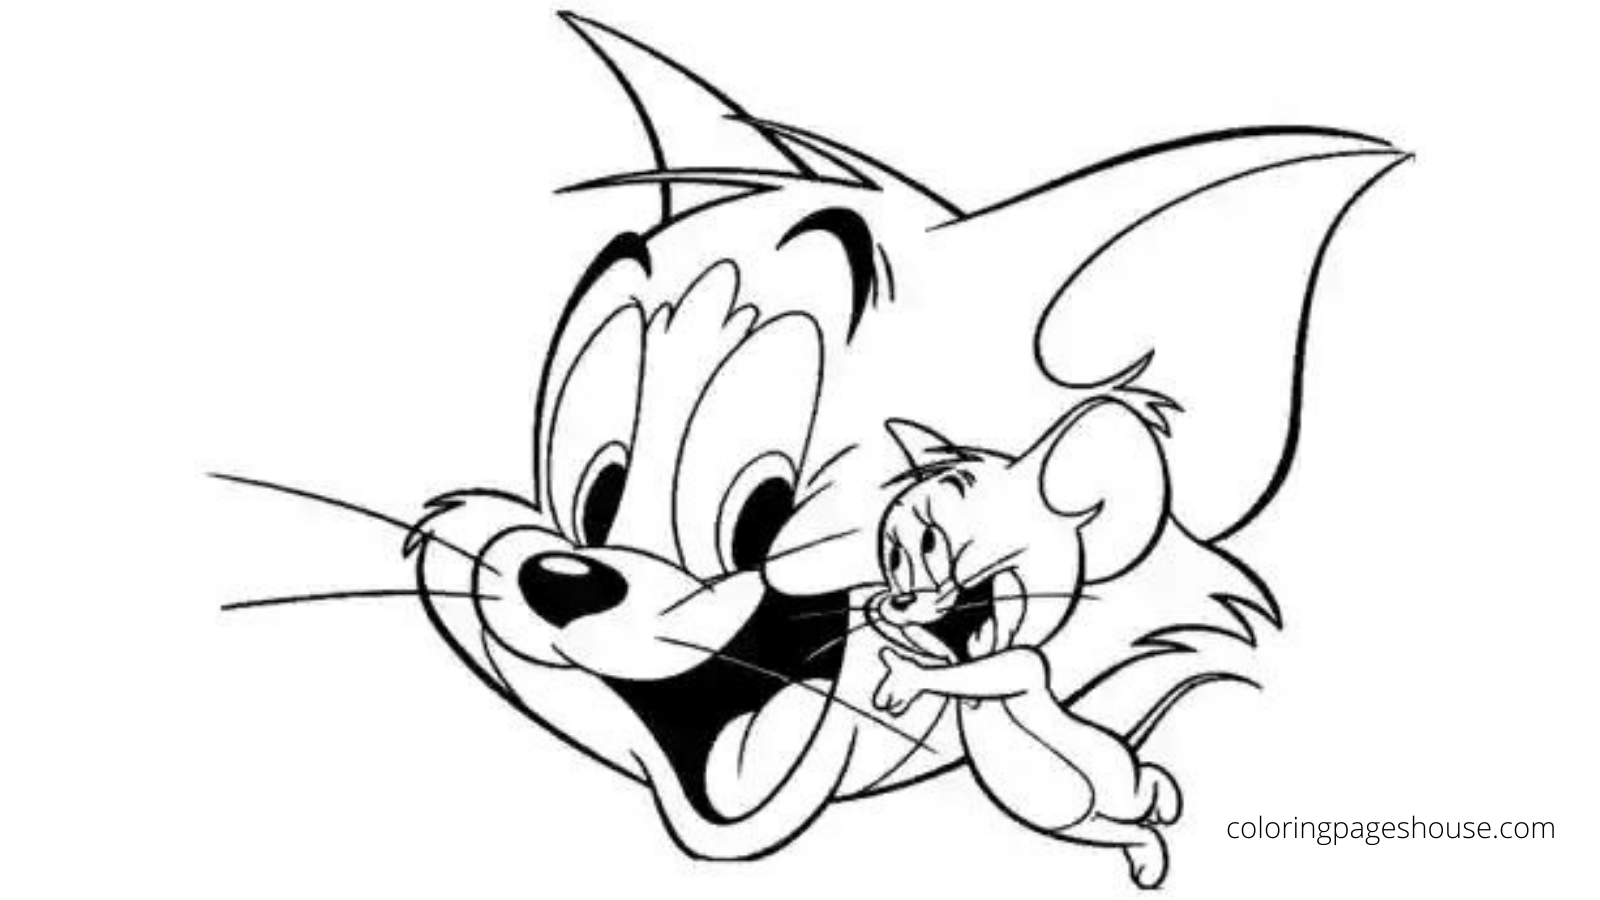 Techno gamer on x happy tom and jerry coloring page follow us to get more free printable coloring pages httpstcoraguvlyxt coloringpages coloringpagesforadults coloringpagesforkids coloringbook coloring disney cartoon anime tomandjerry